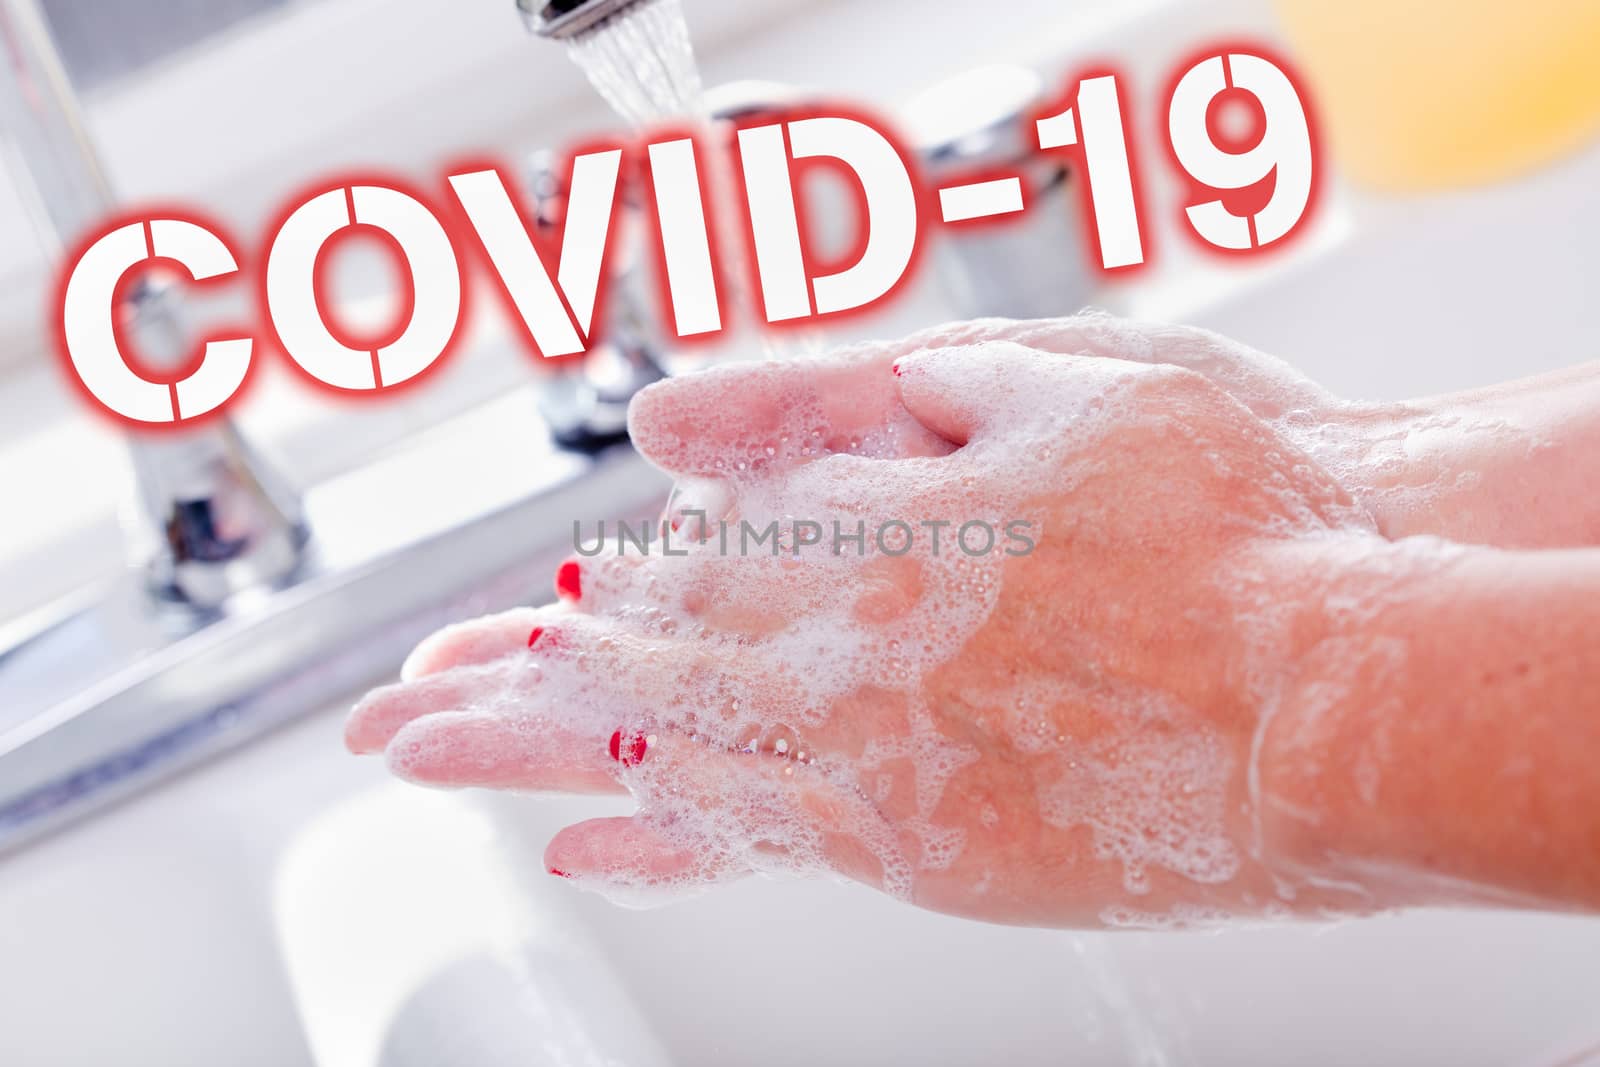 Woman Thoroughly Washing Hands in the Sink Basin With COVID-19 Coronavirus Text.